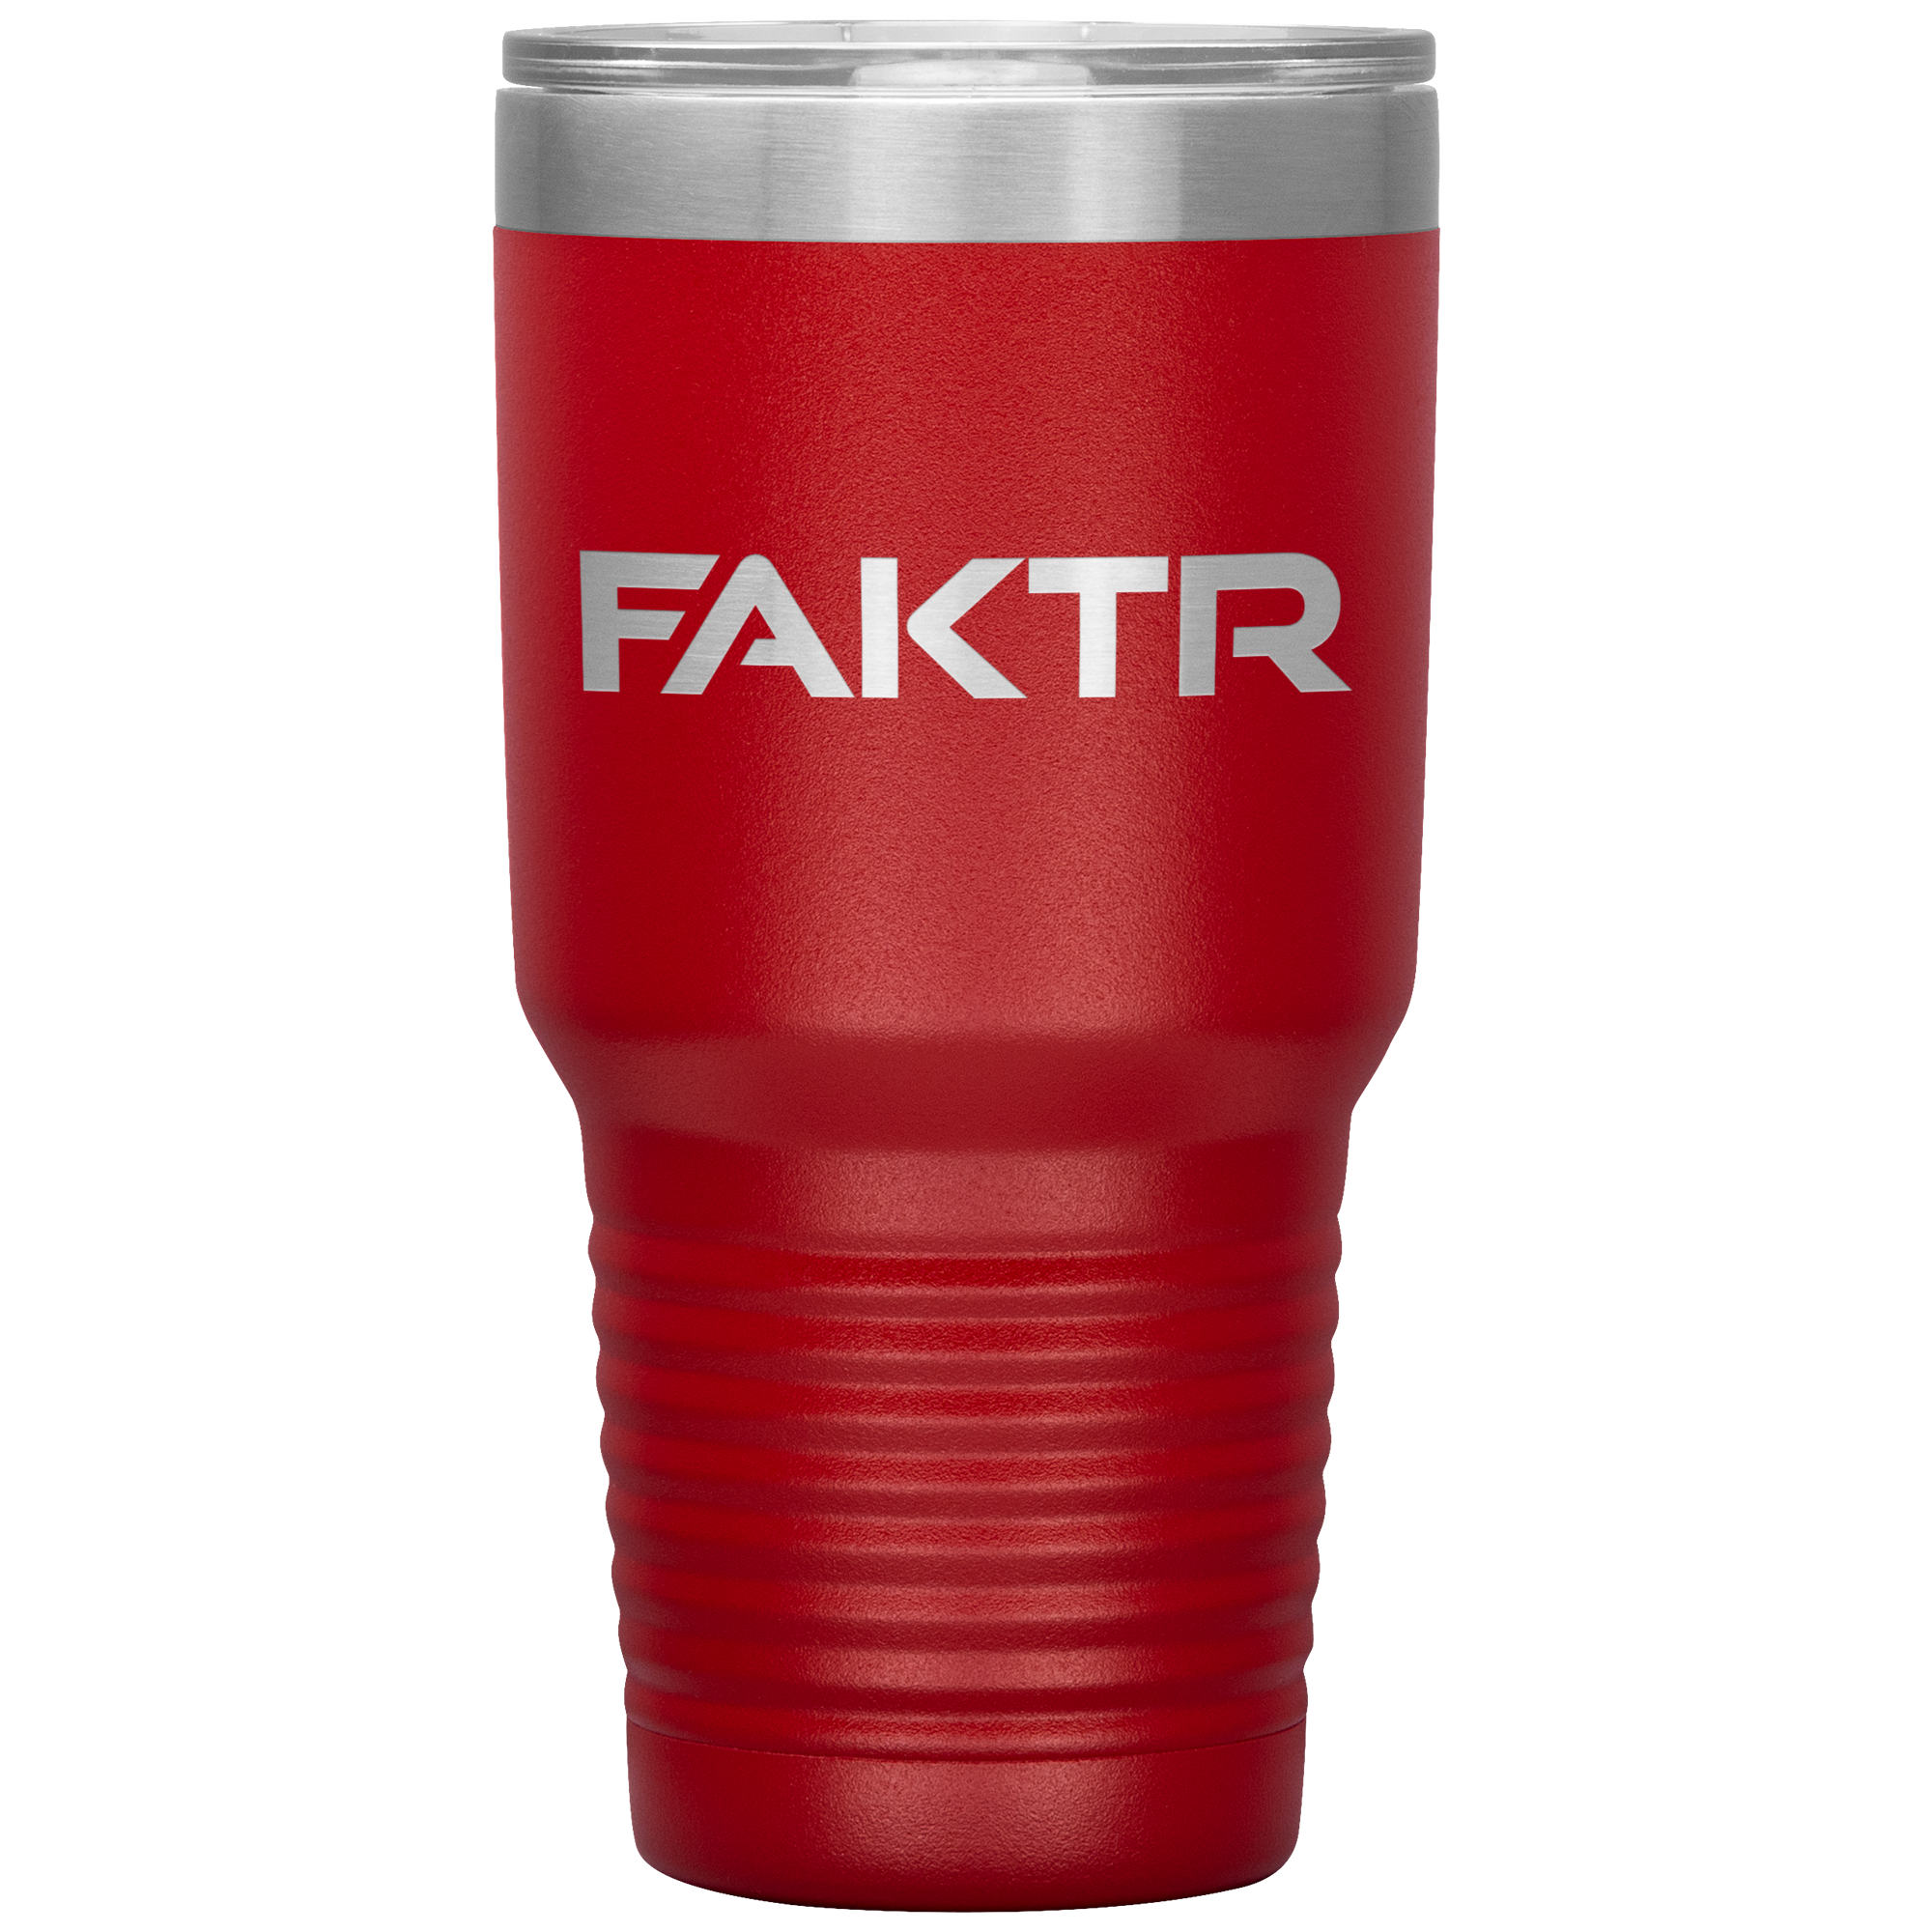 30 oz tumbler with handle : r/YetiCoolers